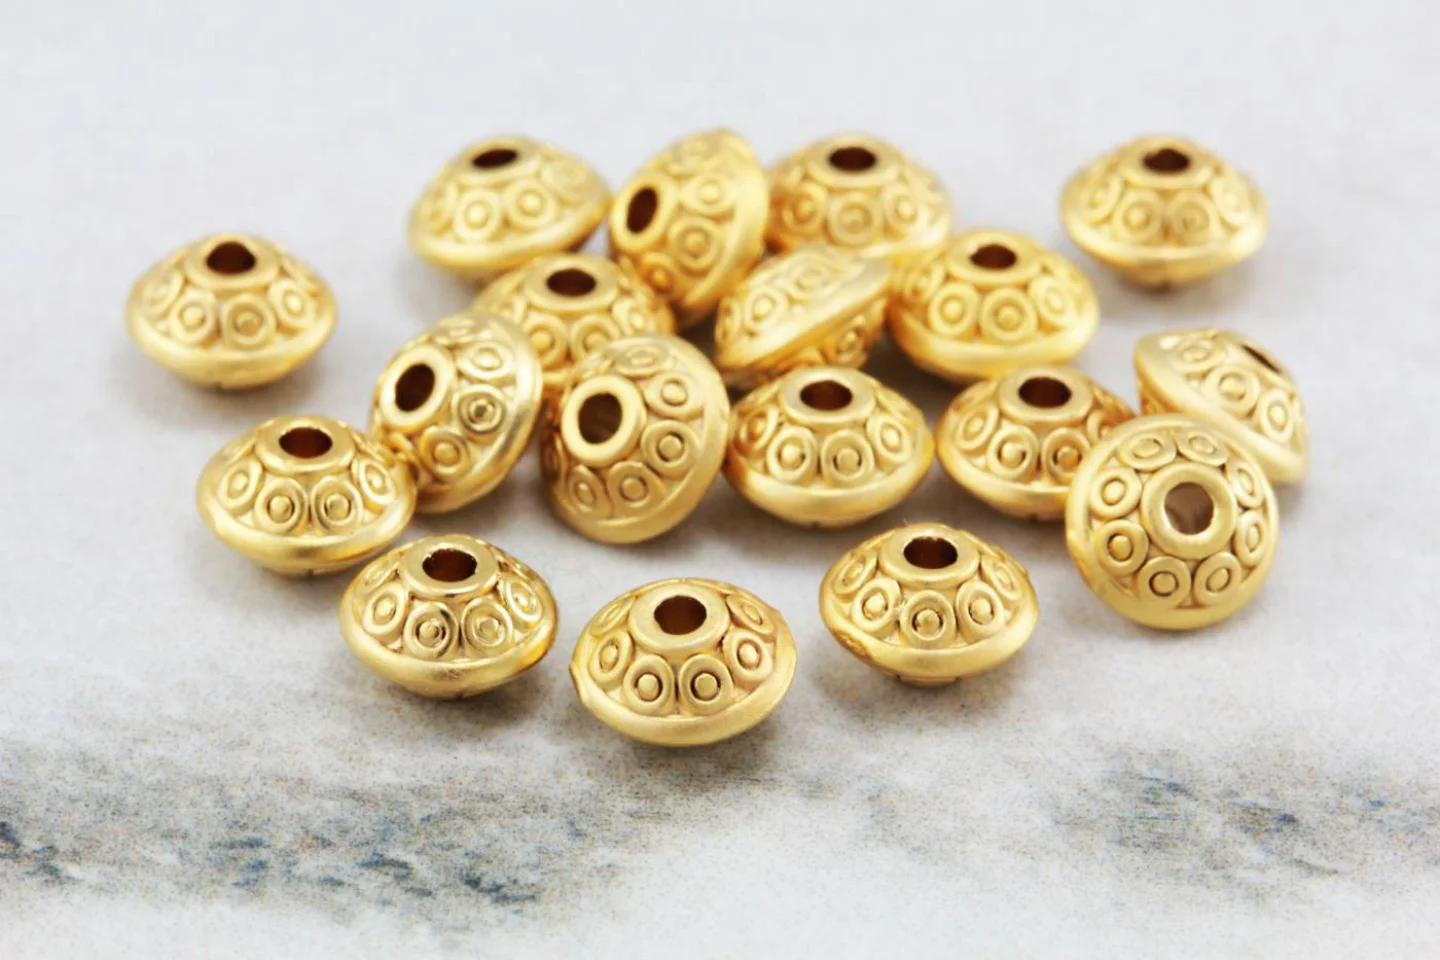 7mm-gold-mini-rondelle-bead-spacers.